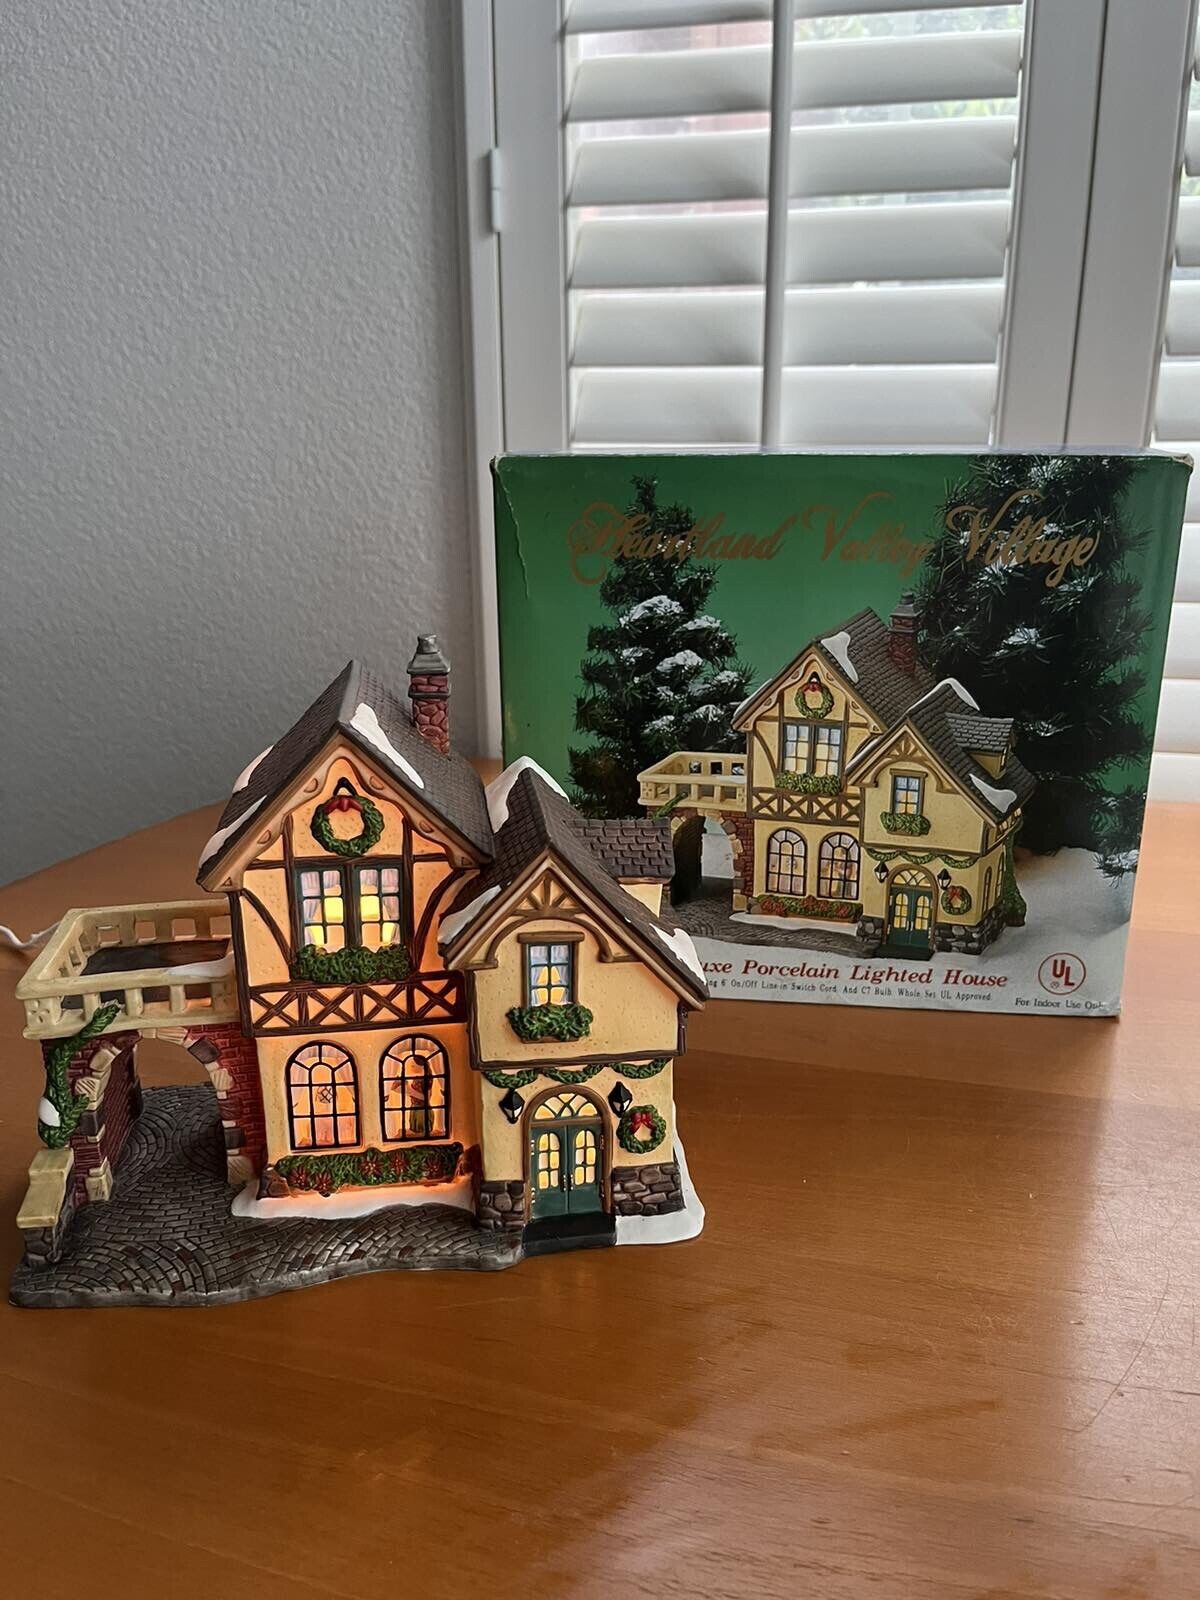 Heartland Valley Village Deluxe Porcelain Lighted House Countryside home w/ box